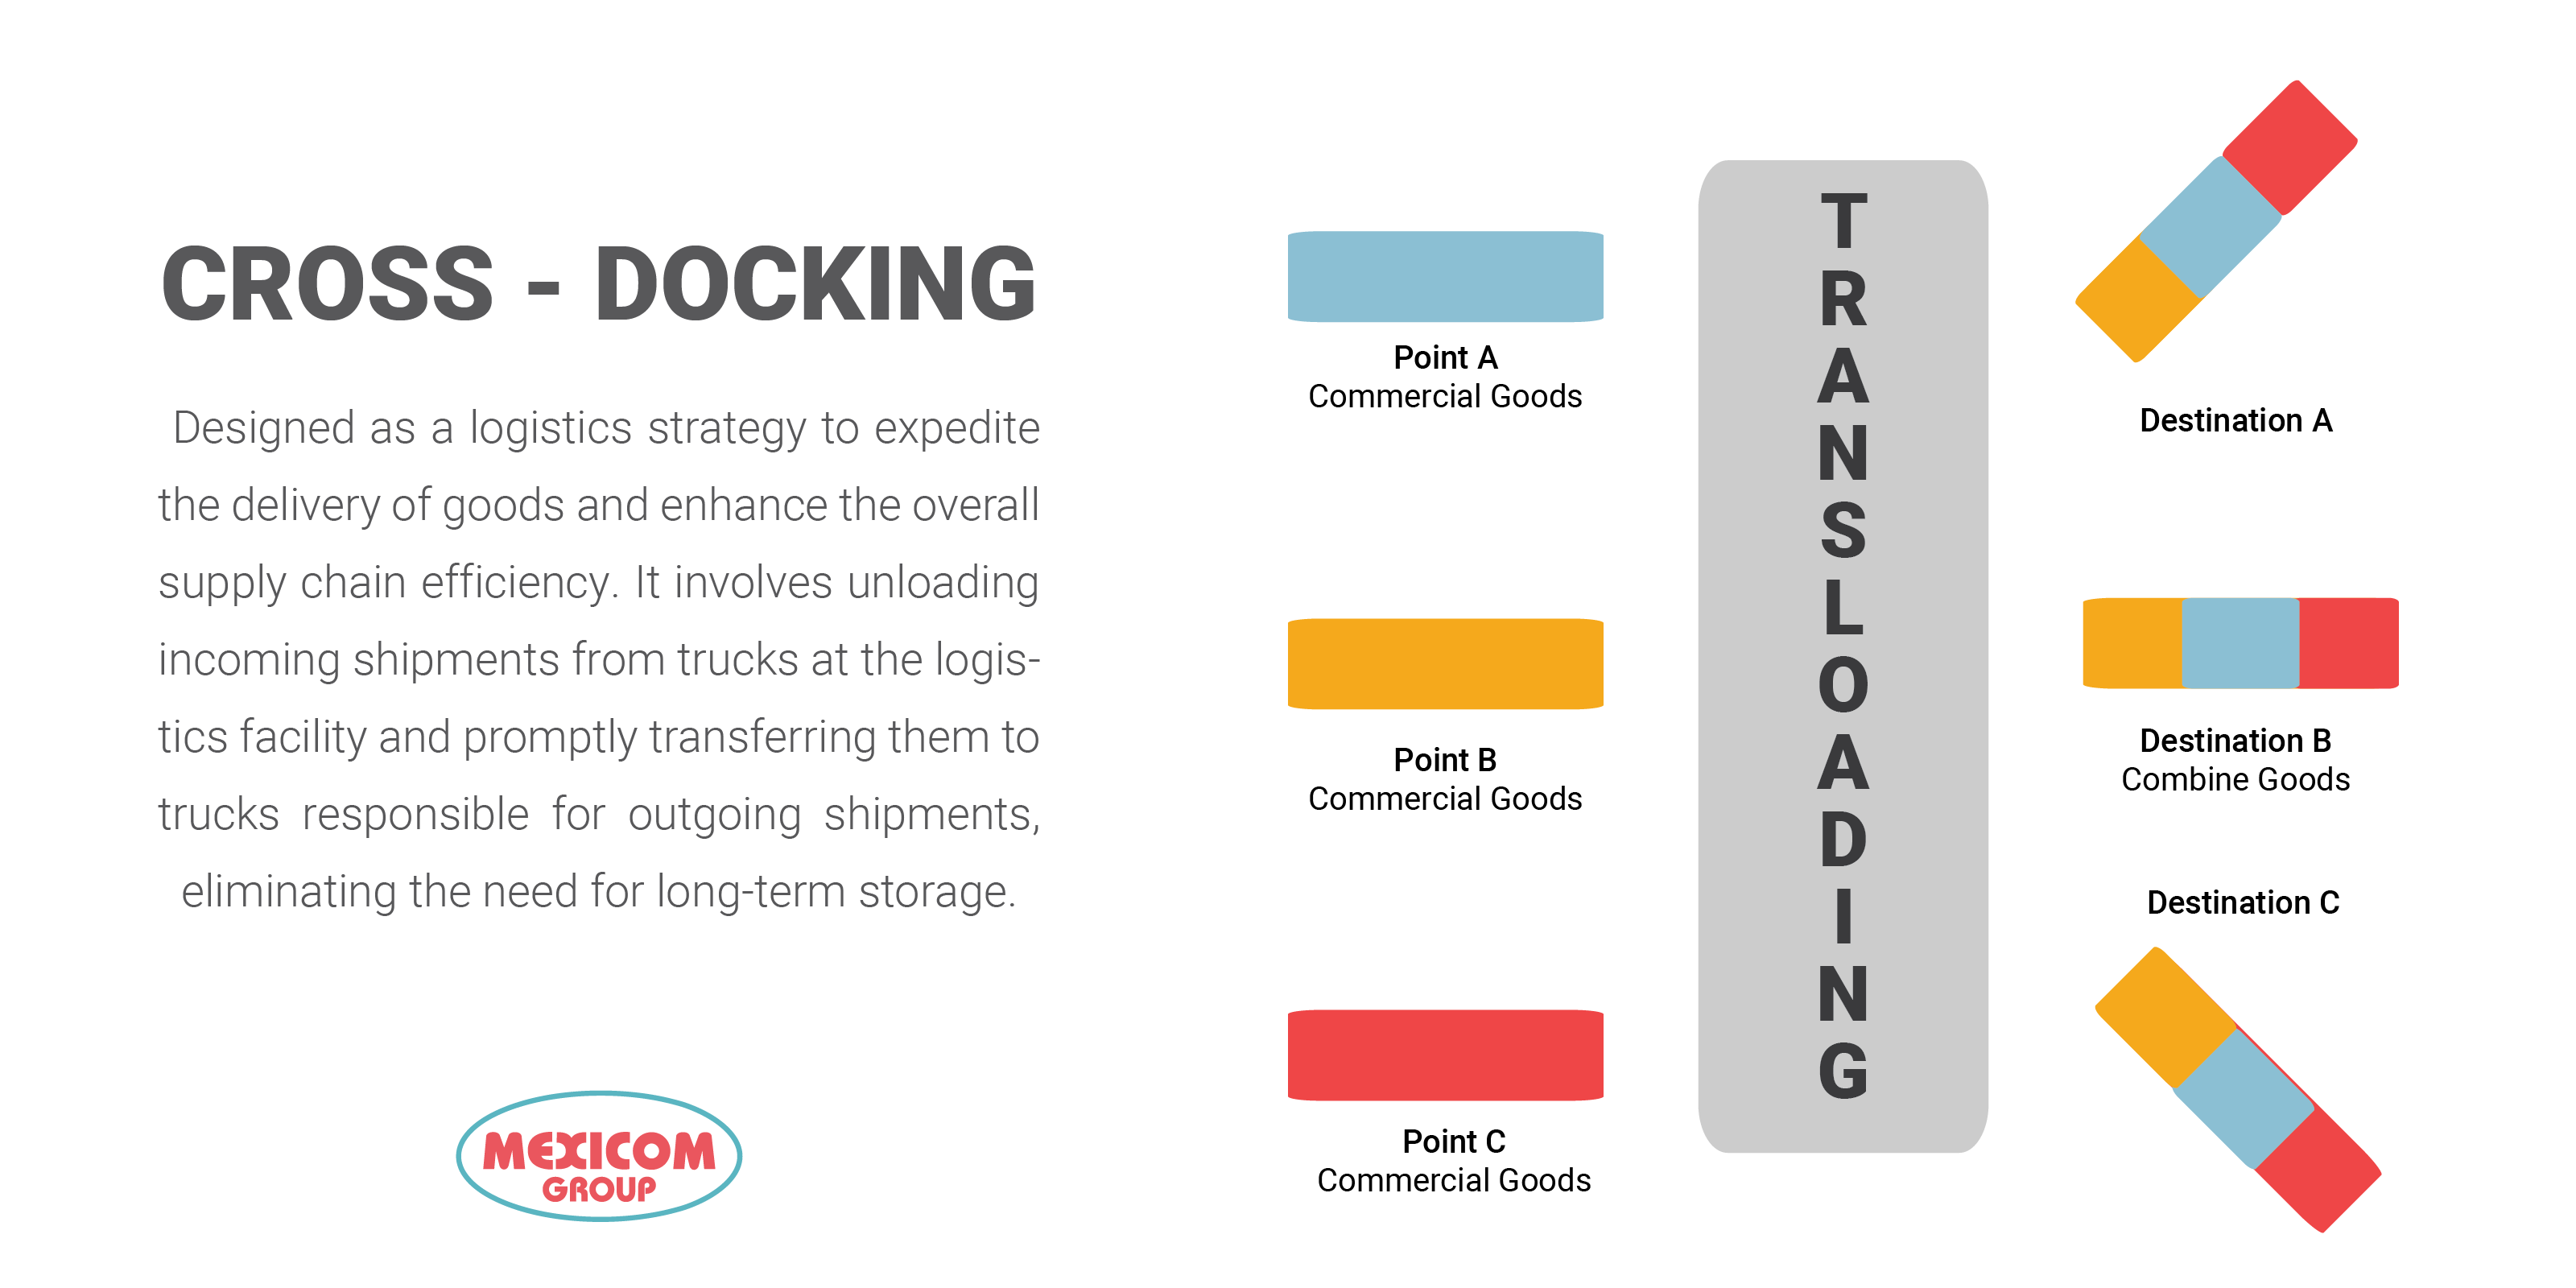 Cross-docking is designed as a logistics strategy to expedite the delivery of goods and enhance the overall supply chain